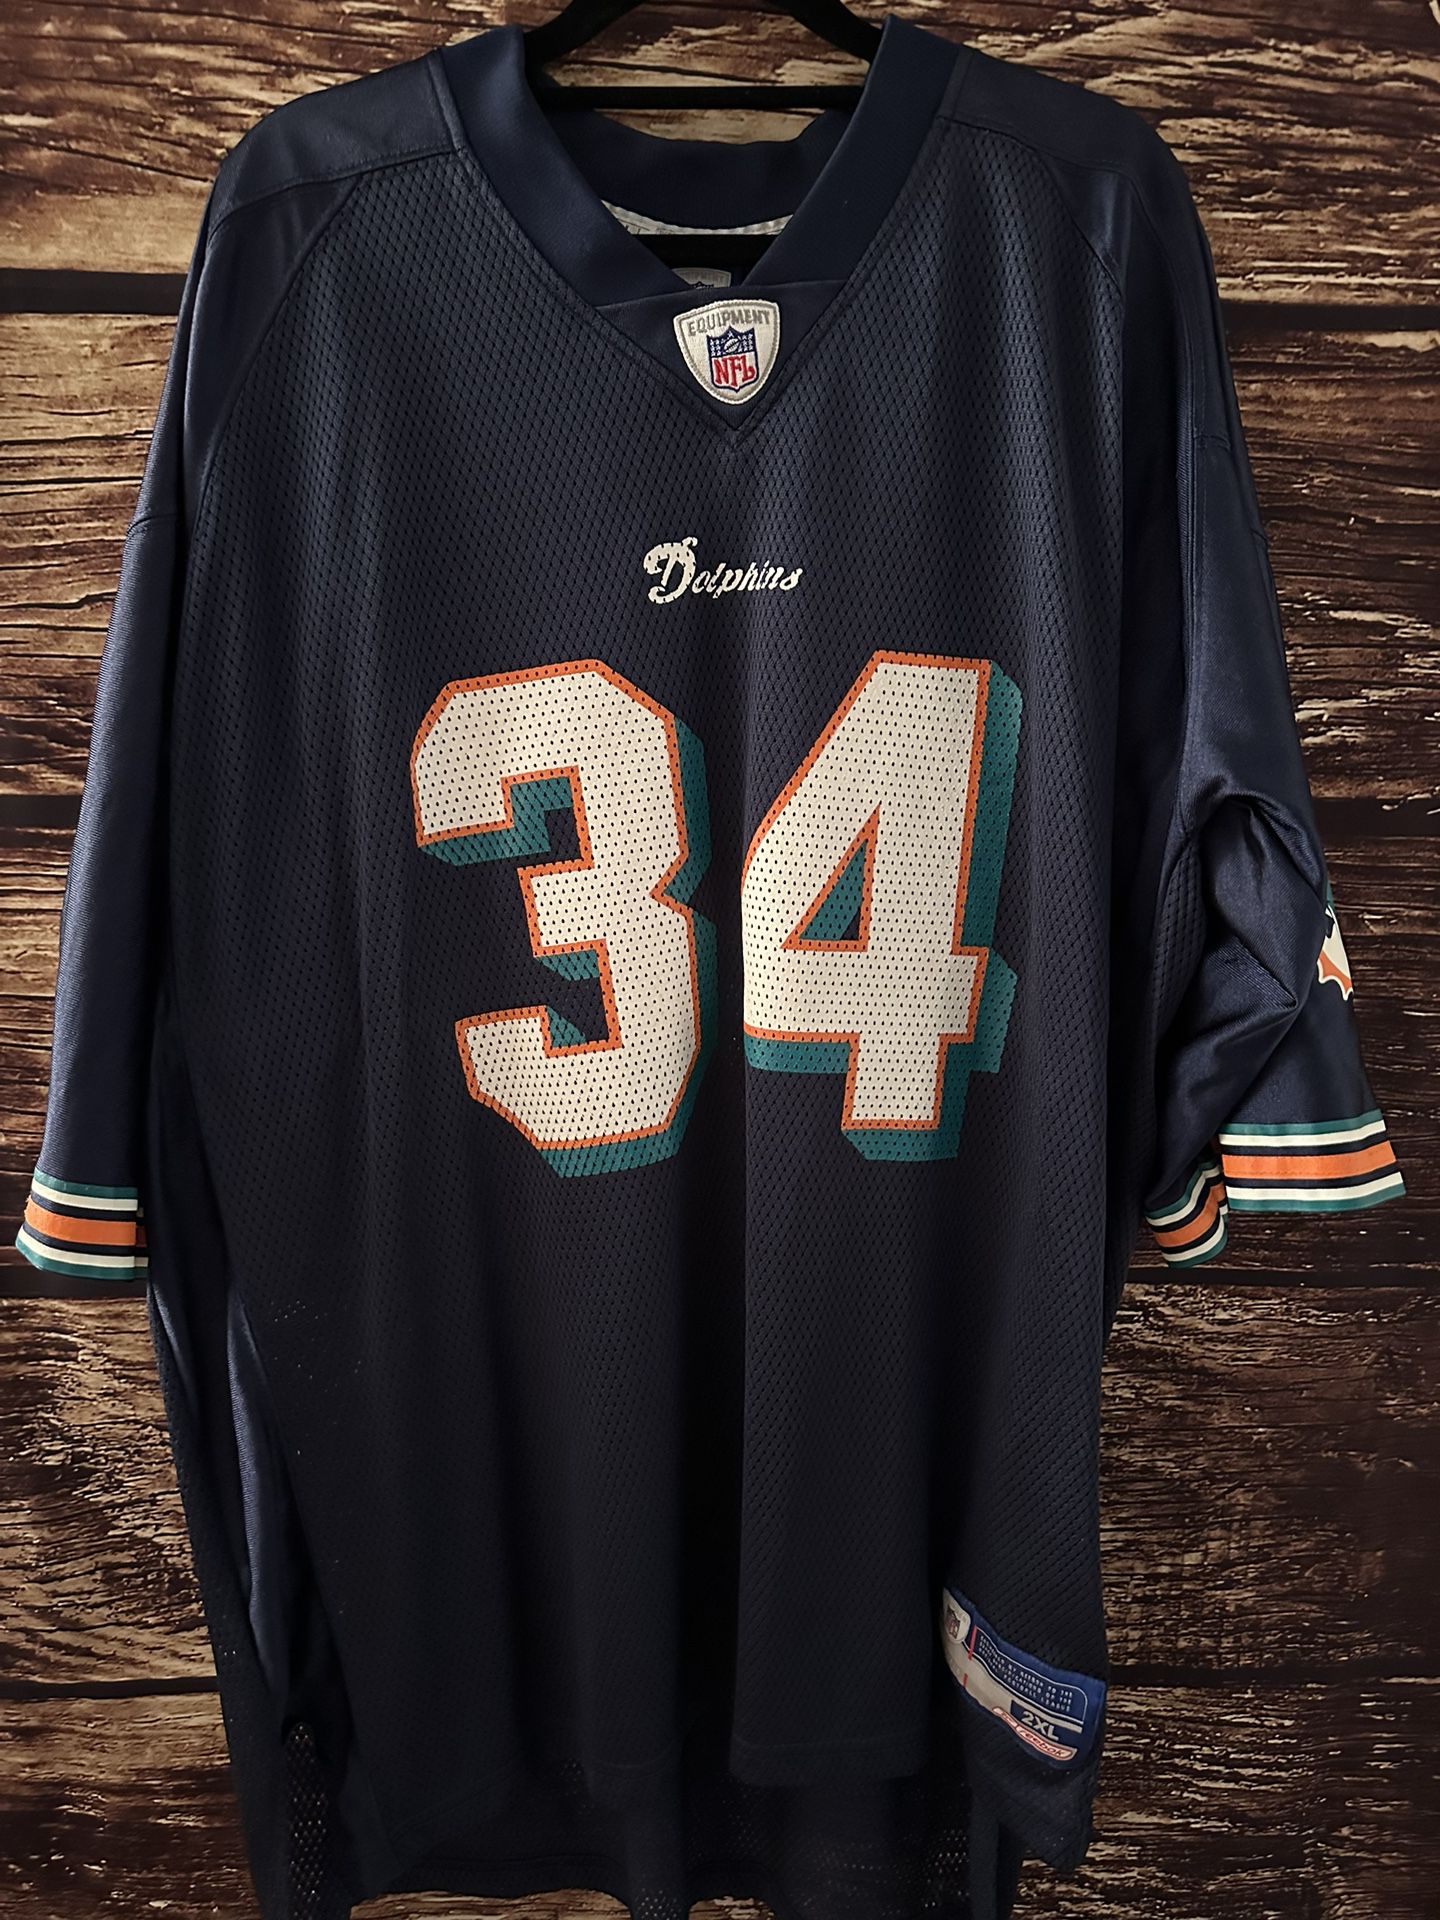 Ricky Williams Miami Dolphins NFL Limited Edition Jersey